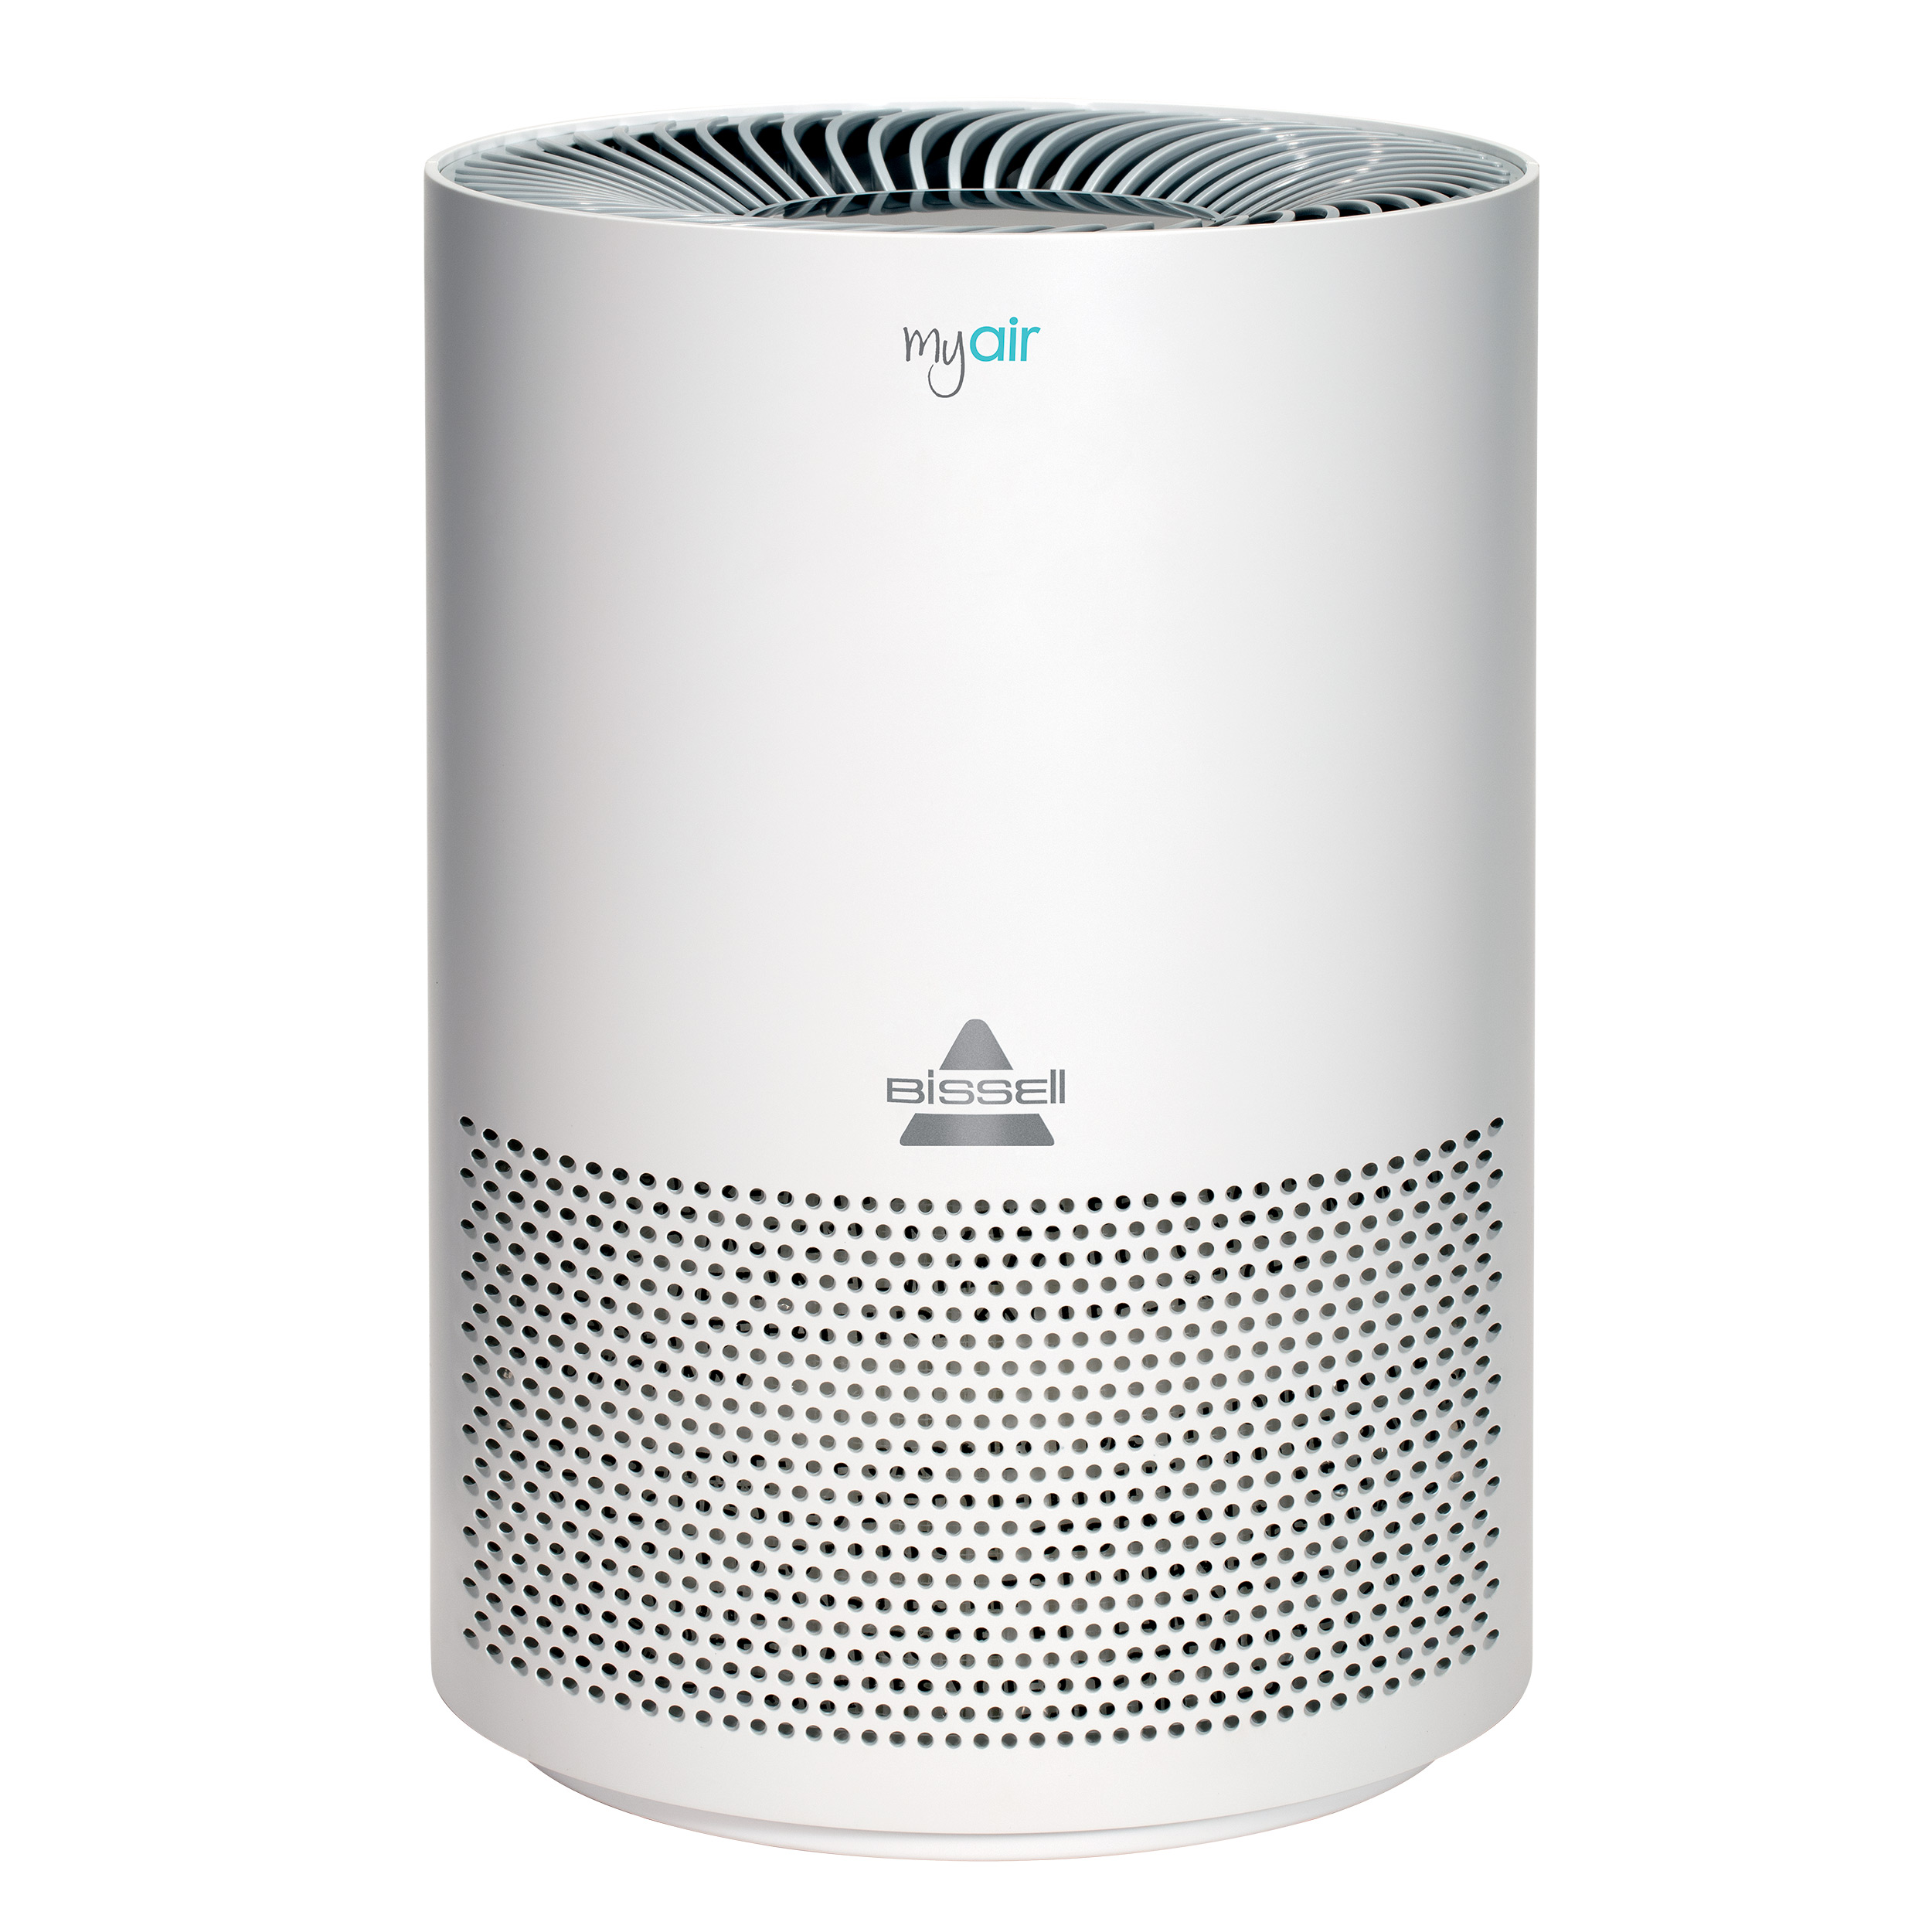 BISSELL MyAir Personal Air Purifier, for rooms up to 100 sq. ft., 2780A - image 1 of 8